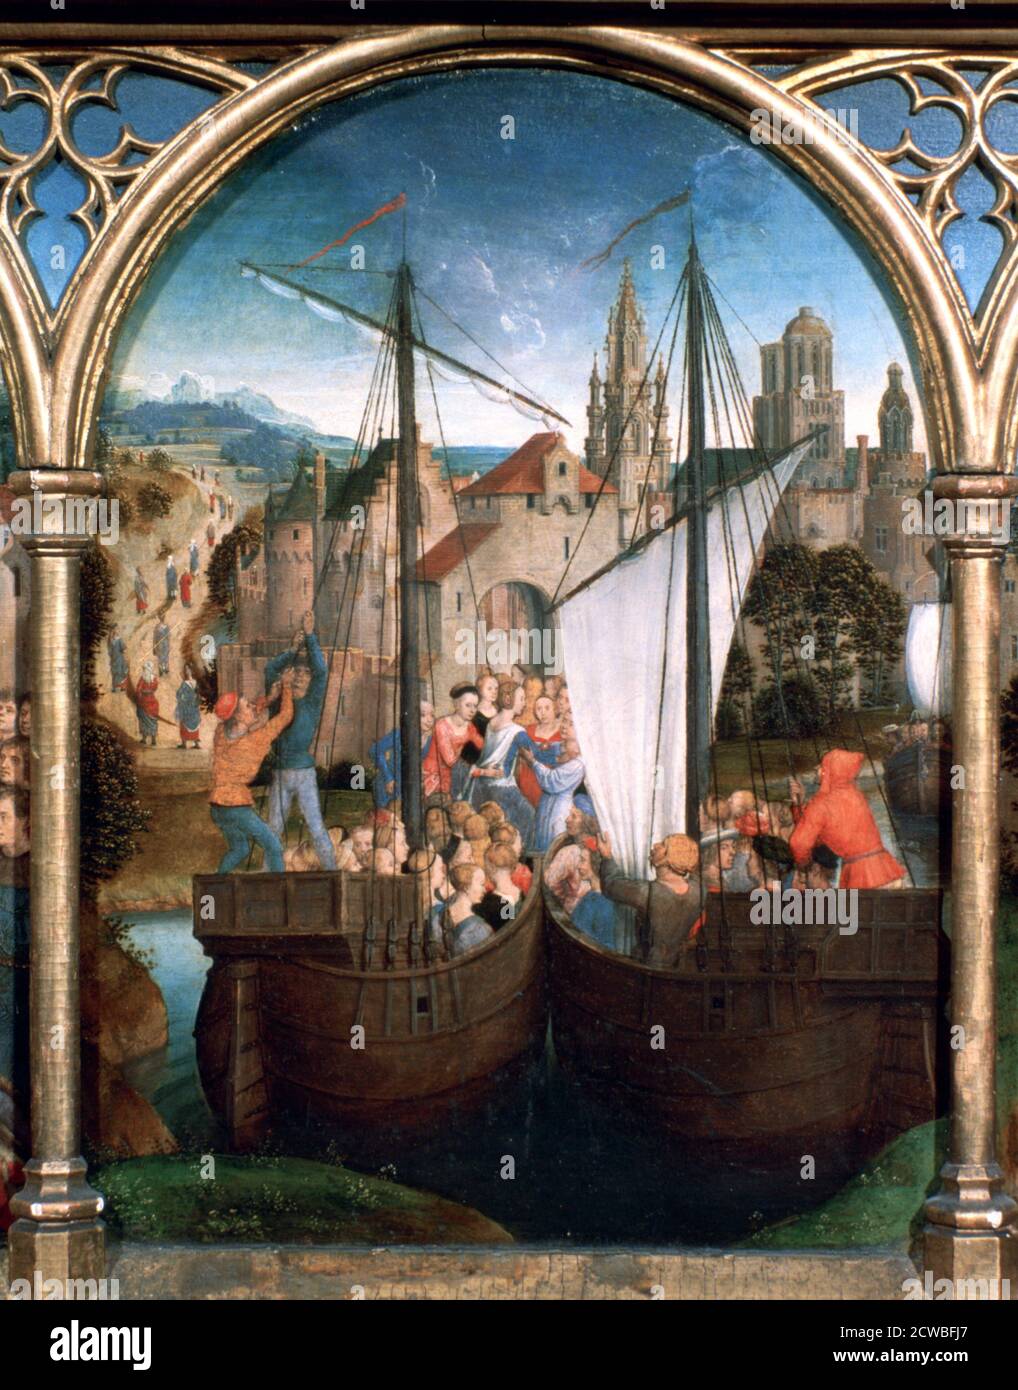 St Ursula Shrine, Arrival in Basle', 1489, Artist: Hans Memling. Hans Memling was the leading artist in Bruges. His work is strongly influenced by Rogier van der Weyden. Stock Photo